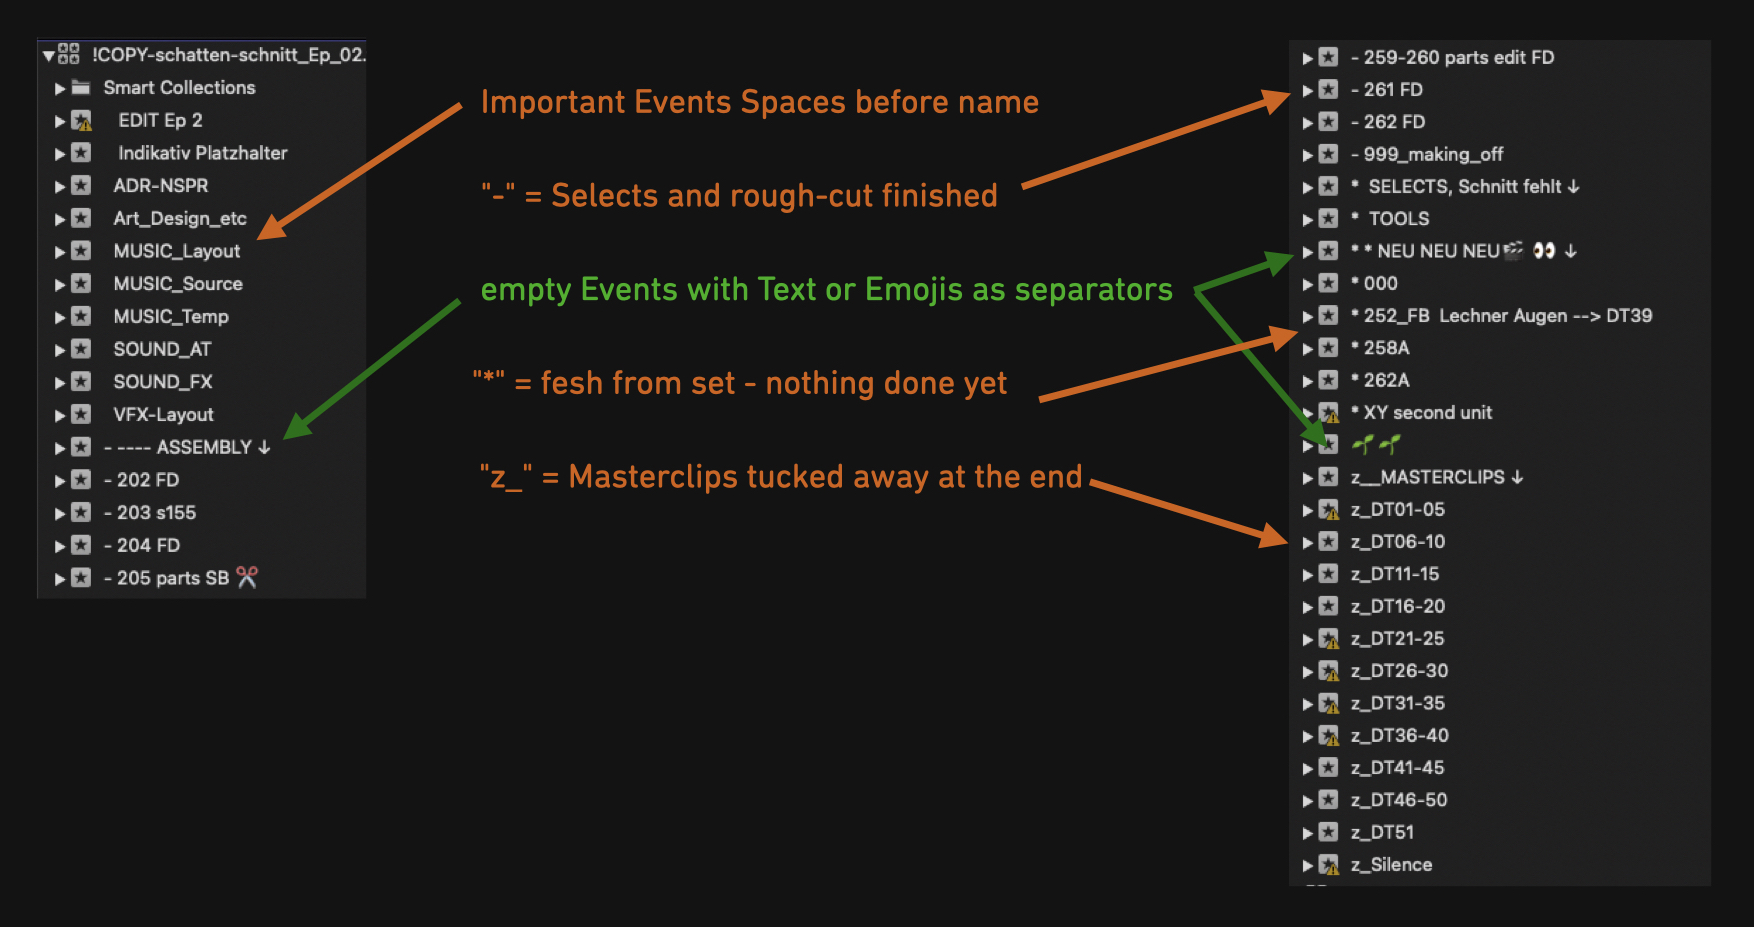 Sorting system with * and Spaces in the beginning of Event-names